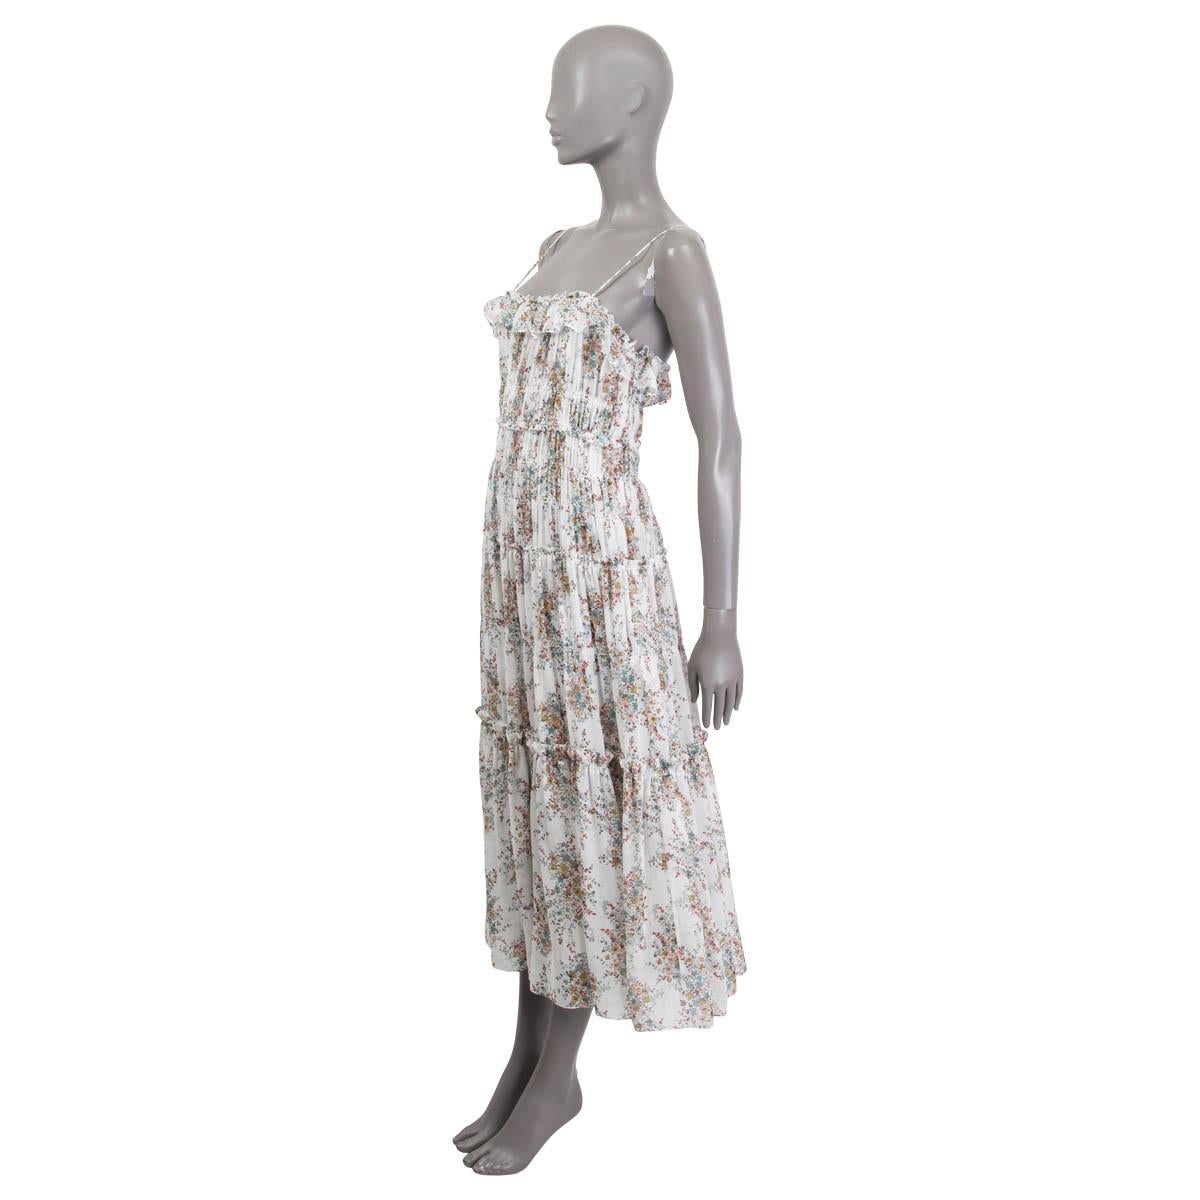 100% authentic Celine sleeveless paneled midi dress in white, green, rose and olive green silk (assumed cause tag is missing). Features ruched details and a floral print. Opens with concealed zipper on the side. Unlined. Has been worn and is in